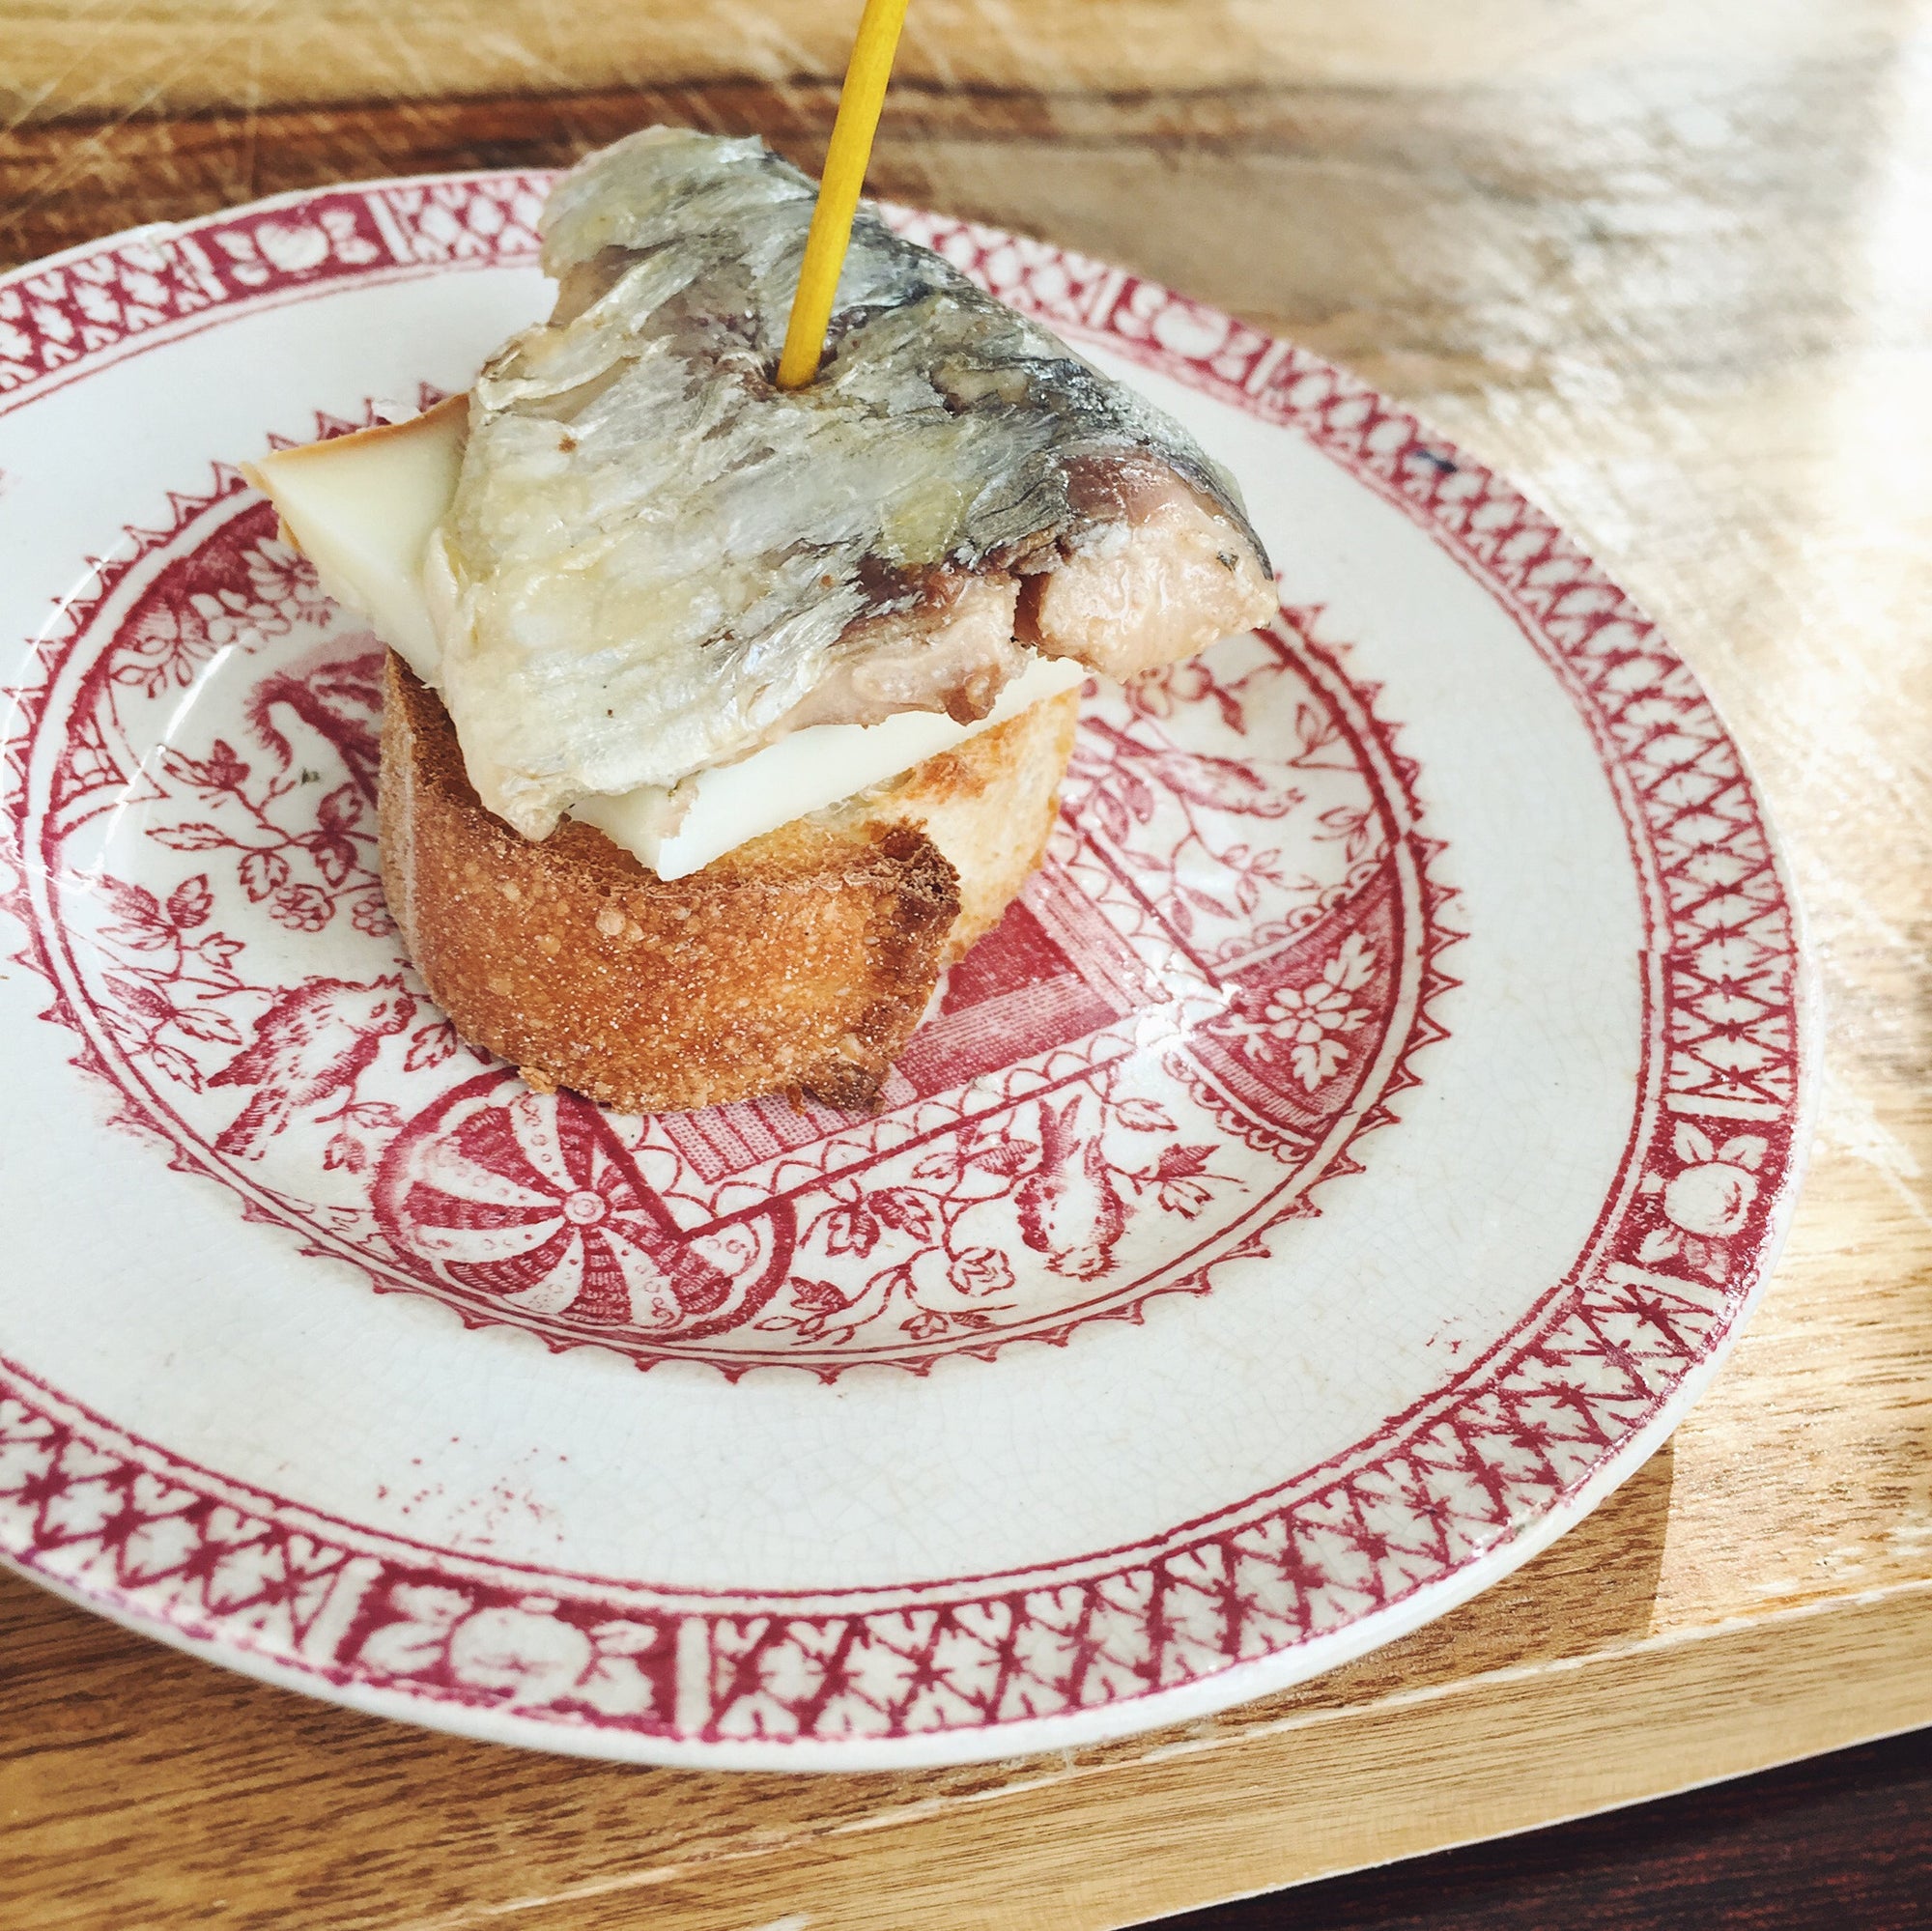 Sardine in Olive Oil with Basque Cheese Pintxo